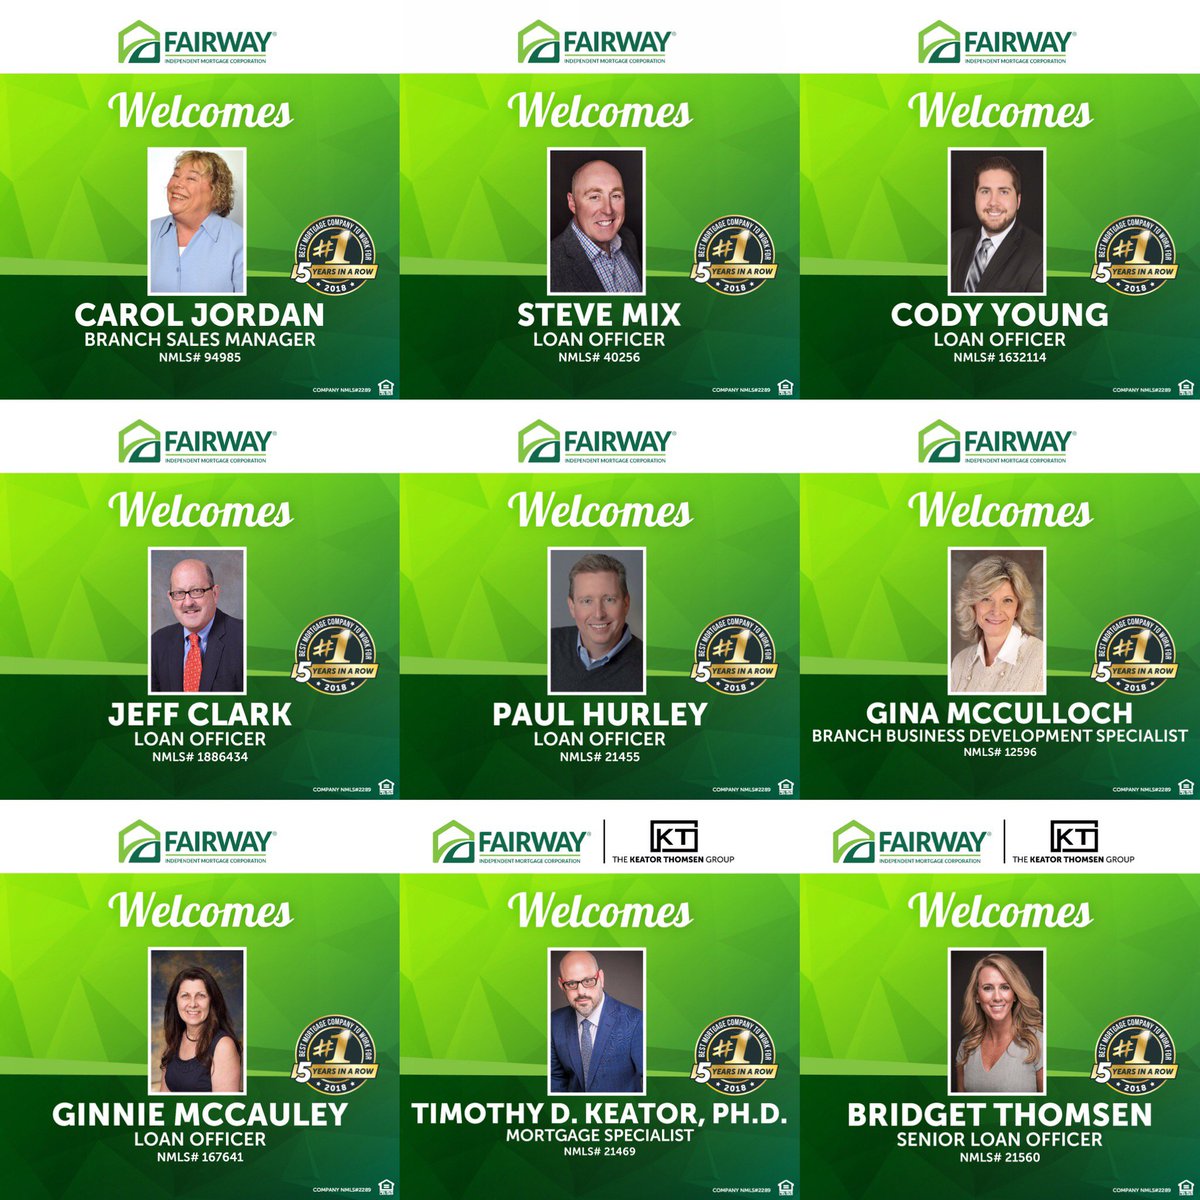 Let's give a warm welcome to the newest members of the Fairway New England Region! 🎉🎉🎉 #fairwaynation #mortgage #loanofficer #rates #homebuying #homebuyer #mortgagebroker #morgageloanofficer #mortgagebanker #reatestate #newhome #welcome #family #team #fairwayfamily